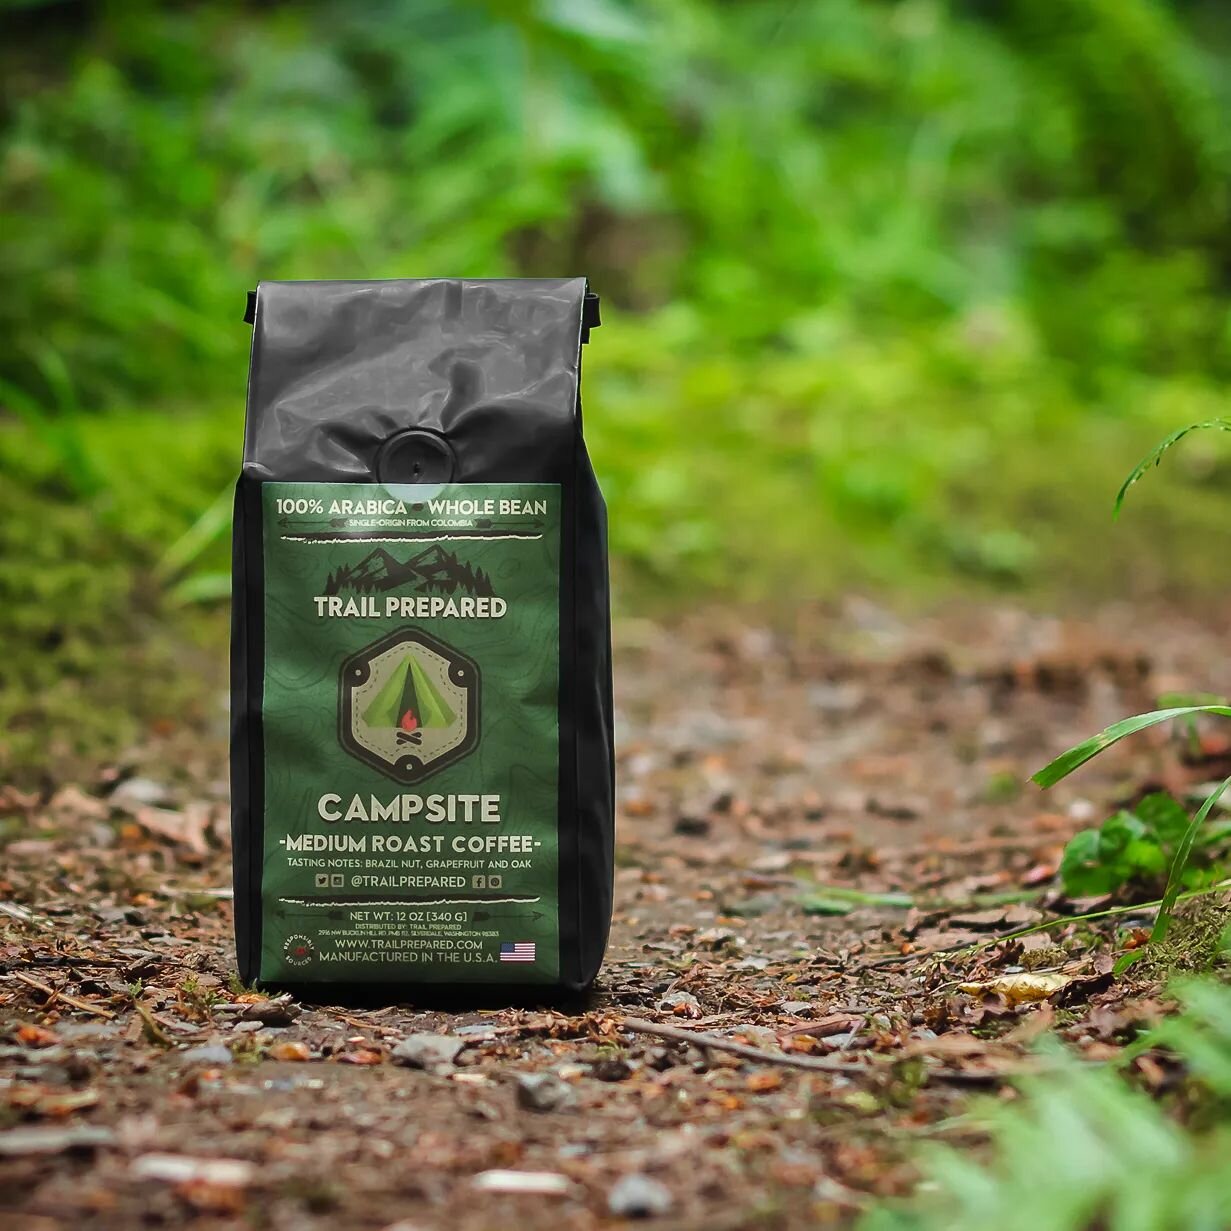 Our Campsite Coffee is BACK IN STOCK!!! ☕🔥🙌 This customer favorite, is a small-batch, artisan roasted, single-origin whole bean coffee. With a medium roast profile, and wonderfully smooth tasting notes of the Brazil nut, grapefruit &amp; oak.
Very 